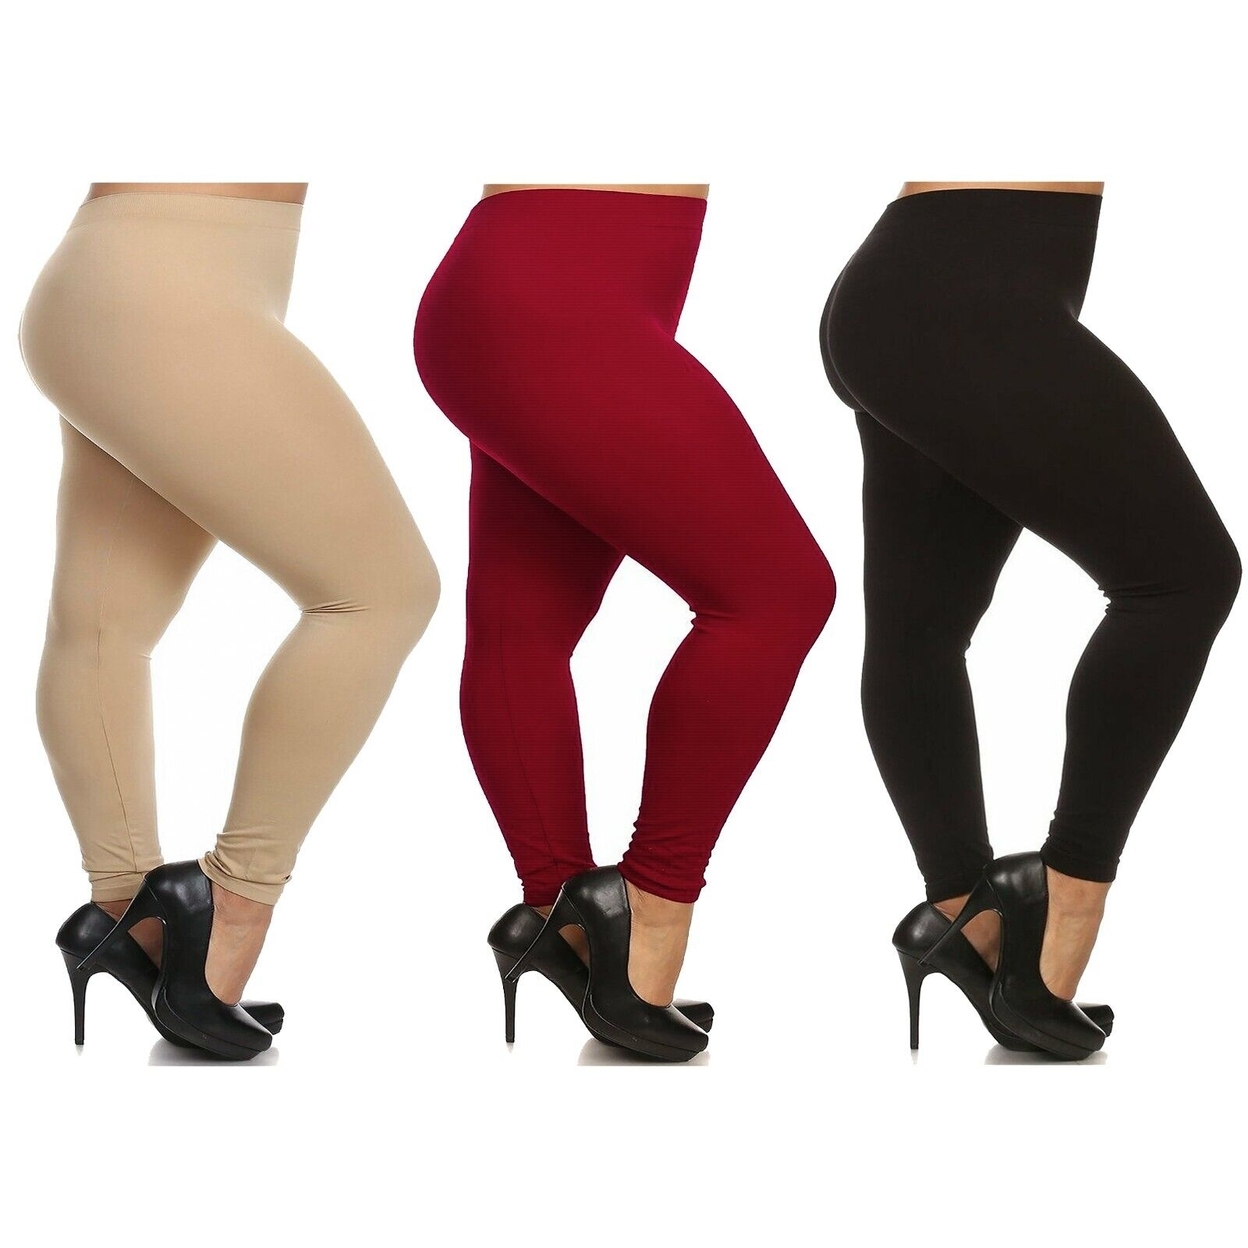 3-Pack: Women's Casual Ultra-Soft Smooth High Waisted Athletic Active Yoga Leggings Plus Size Available - Black,black,black, 3x